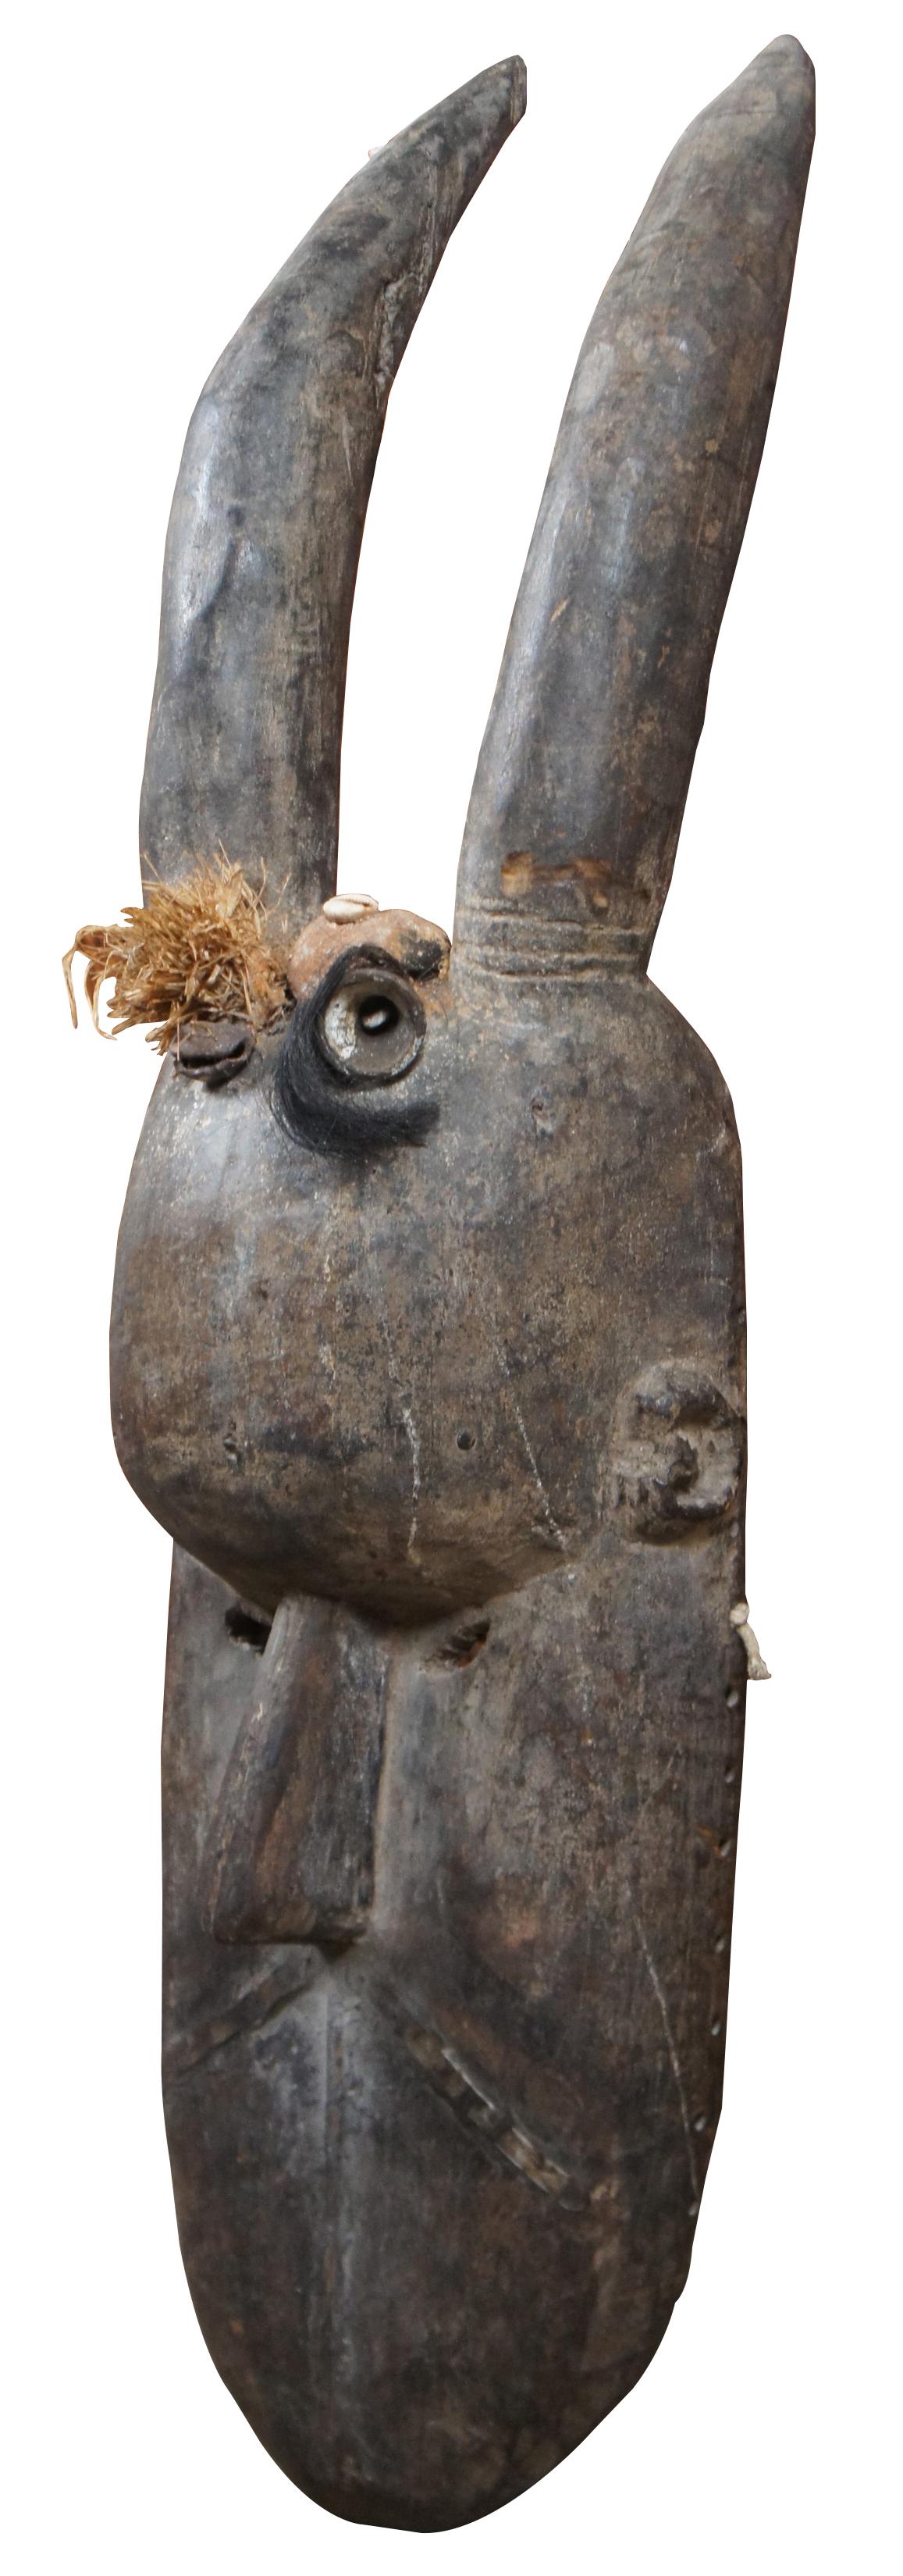 Early antique hand carved Toma or Landai mask from Guinea, Africa. “These brooding, often quite large, masks represent a forest spirit, Landai. Masks like these were used by the men's Poro Society to initiate boys into manhood. The masks, in what